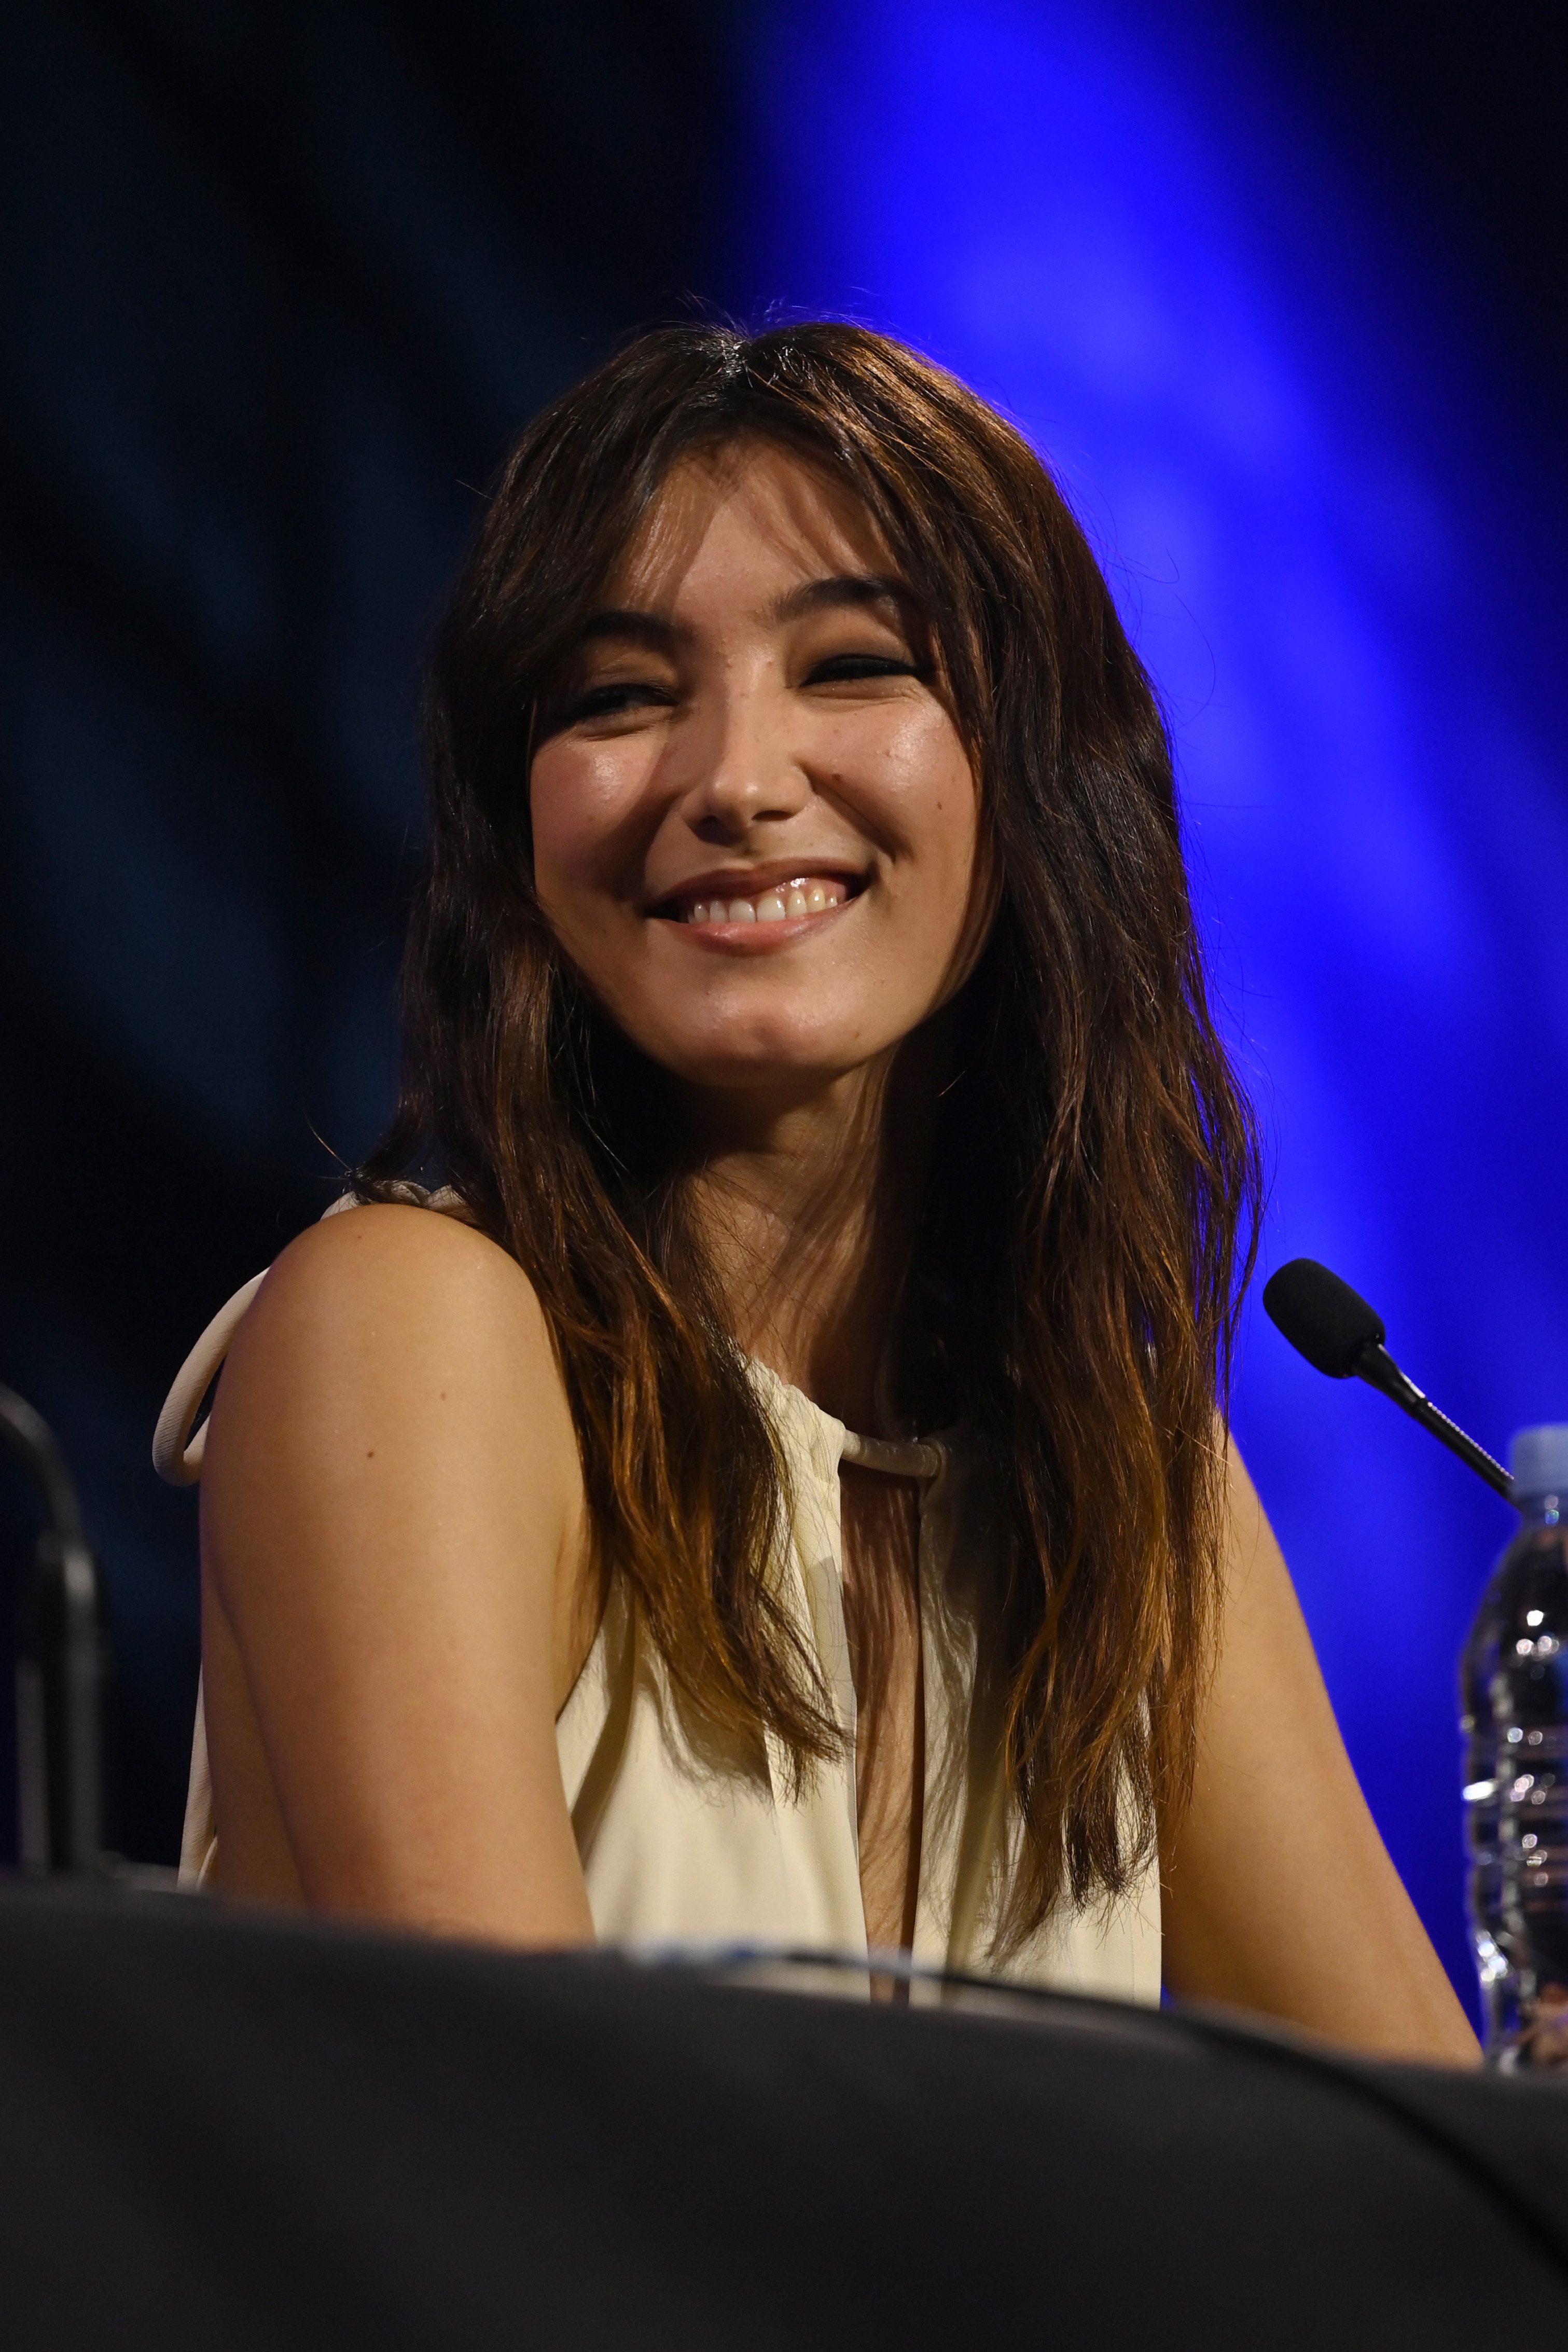 Natasha Liu Bordizzo onstage during the "Ahsoka" panel at the Star Wars Celebration 2023 on April 8, 2023, in London, England. | Source: Getty Images